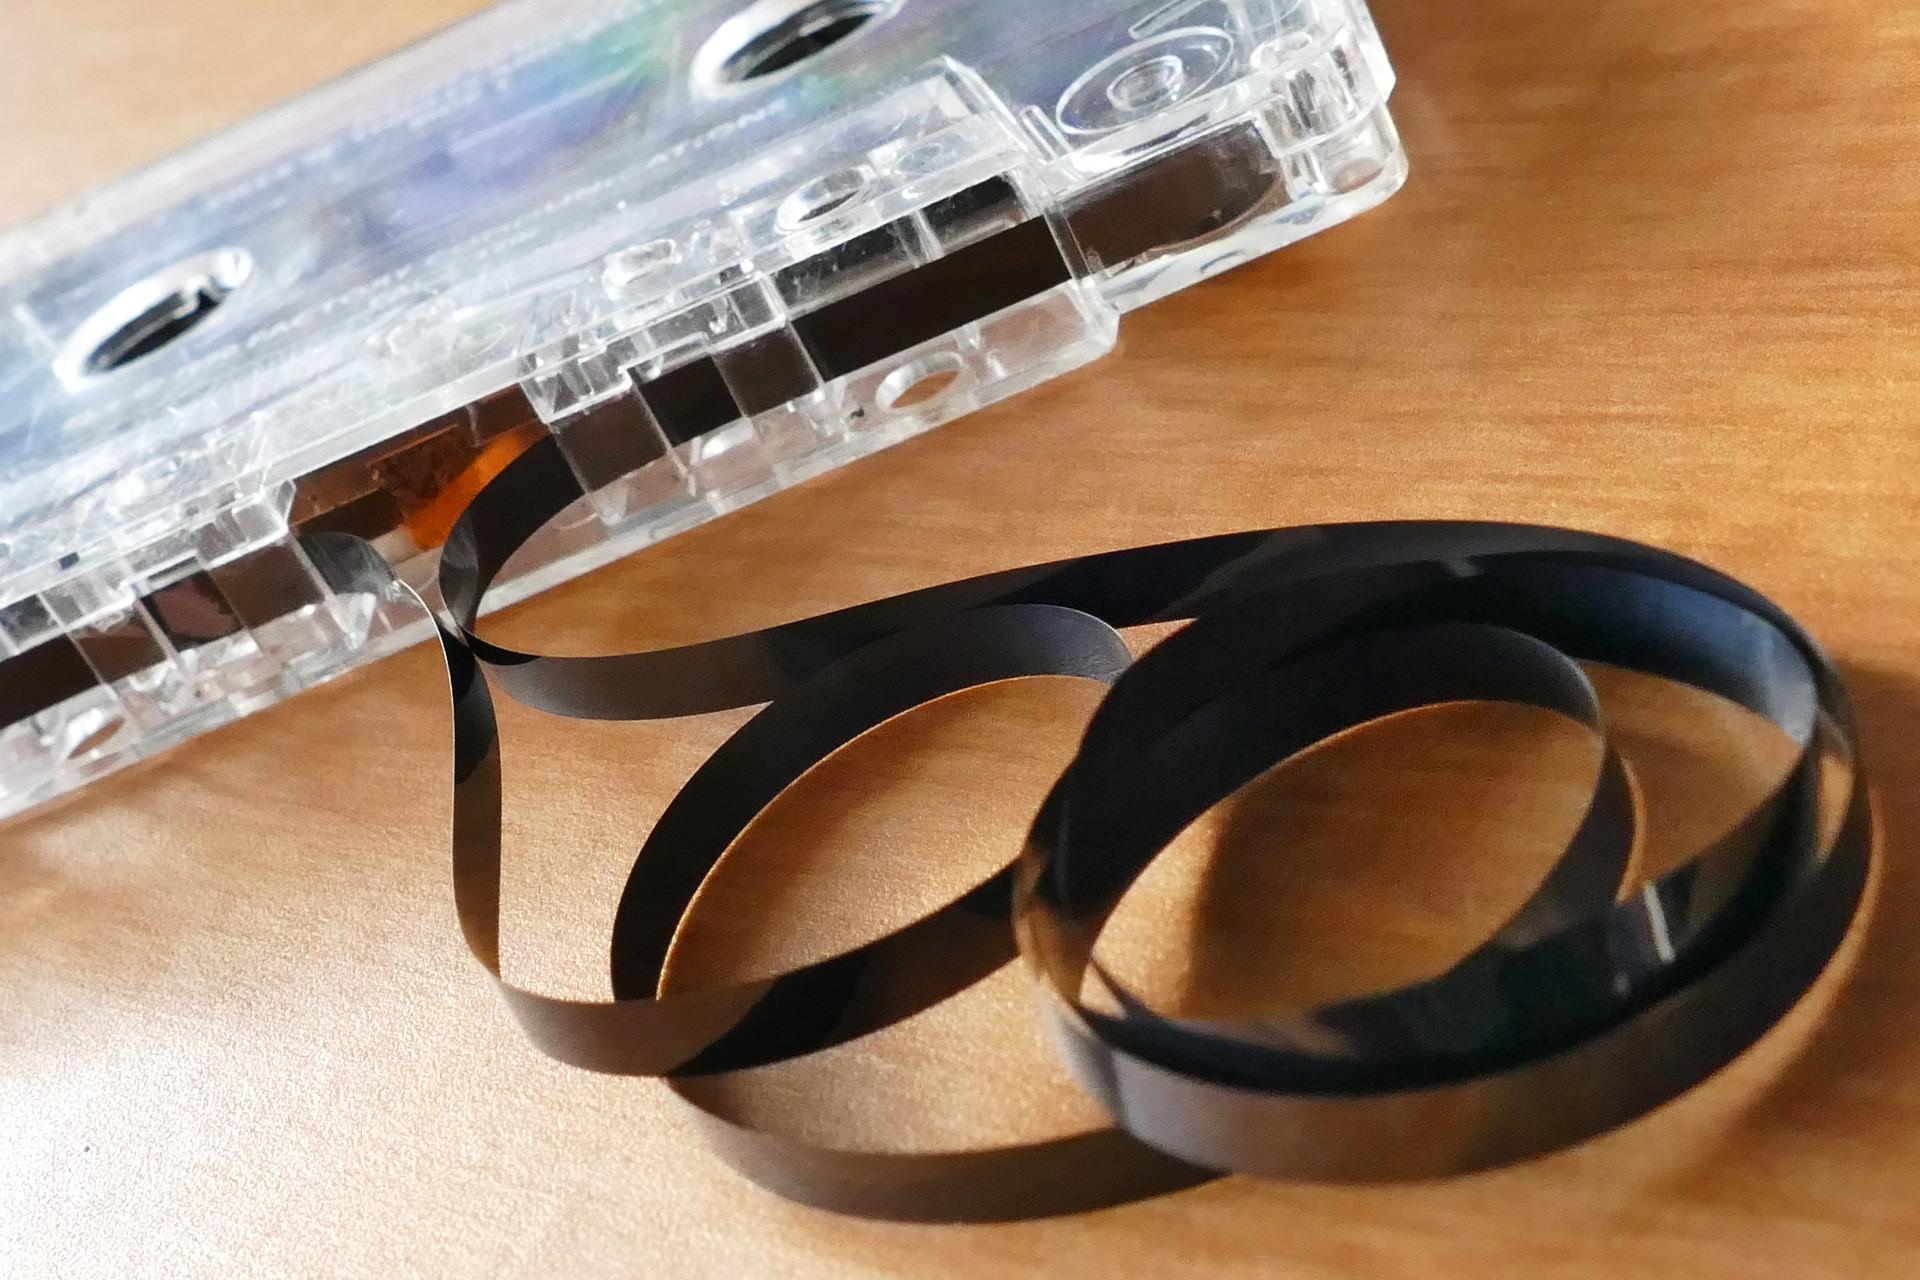 Magnetic Tape Data Storage: What's The Current Maximum Storage